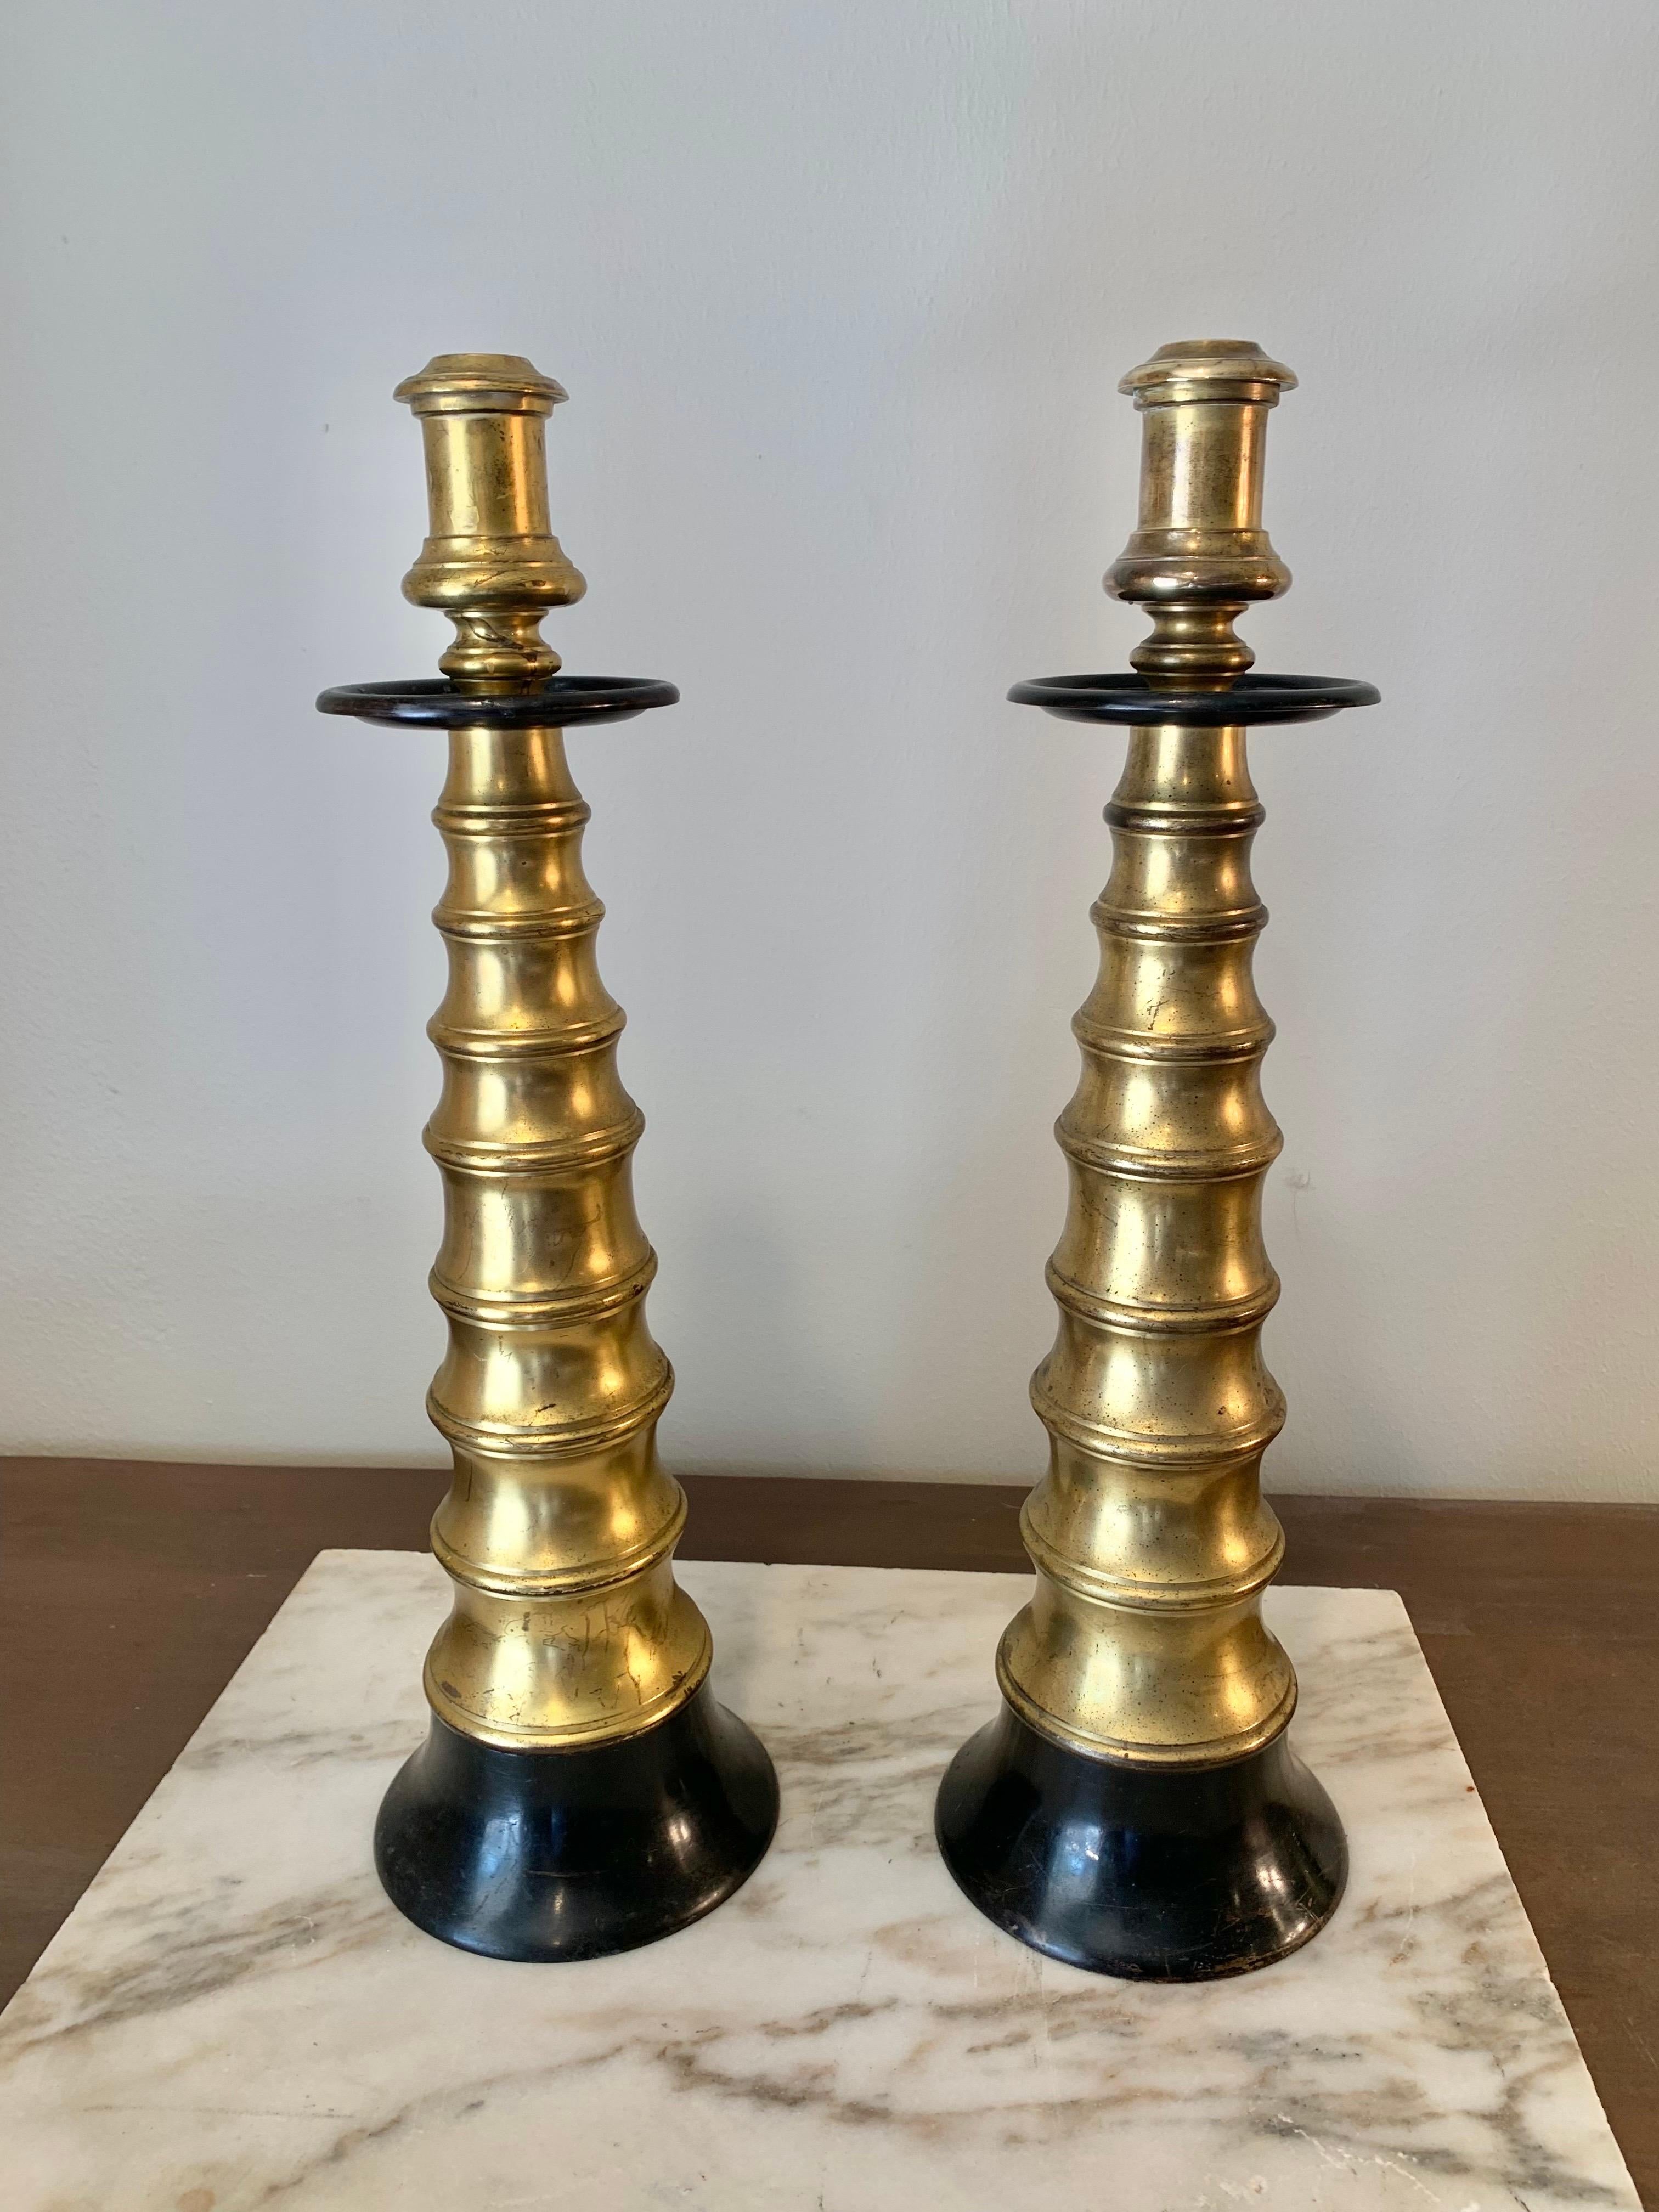 American Mid 20th Century Brass and Ebonized Candle Holders - a Pair For Sale